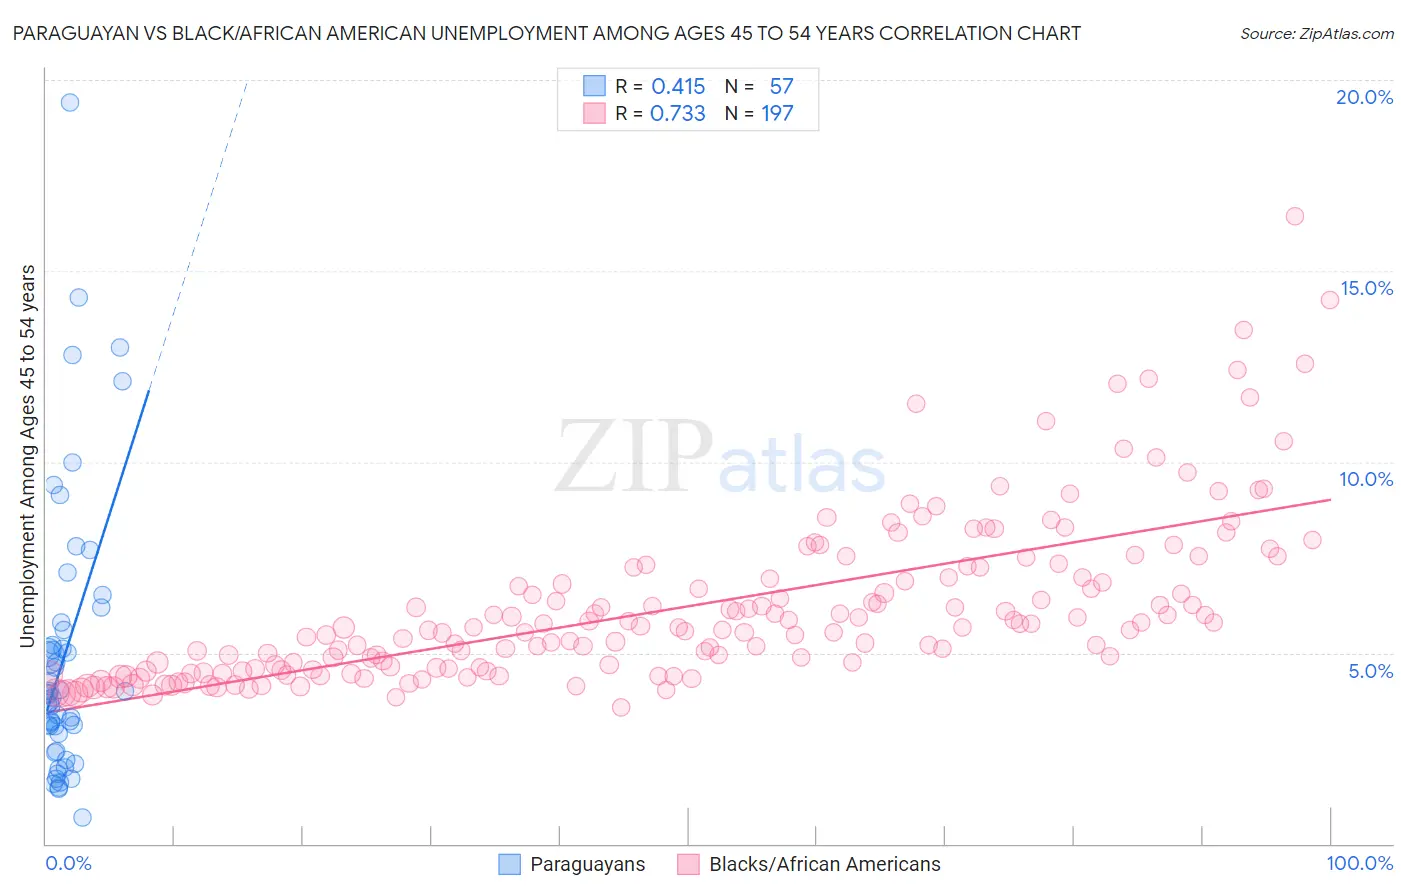 Paraguayan vs Black/African American Unemployment Among Ages 45 to 54 years